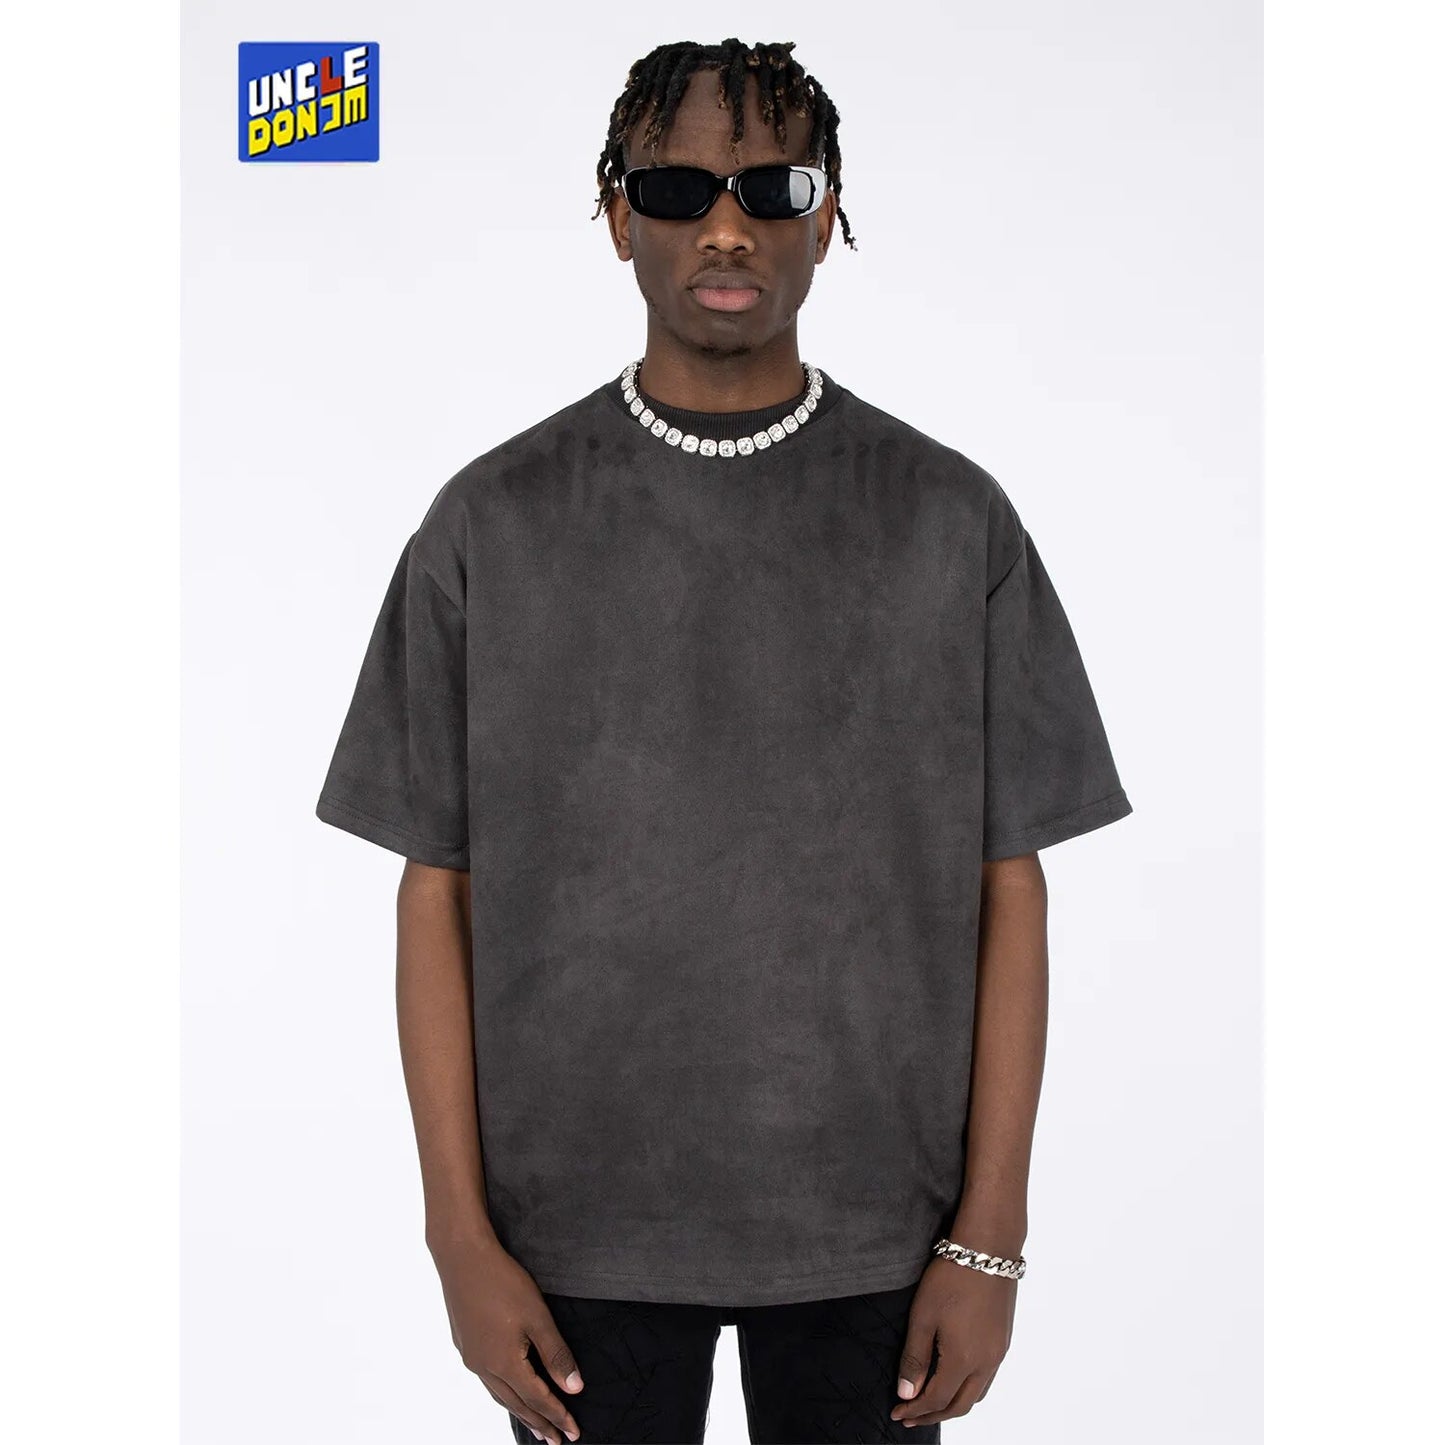 UncleDonJM Suede Embroidered Short Sleeve T-shirt